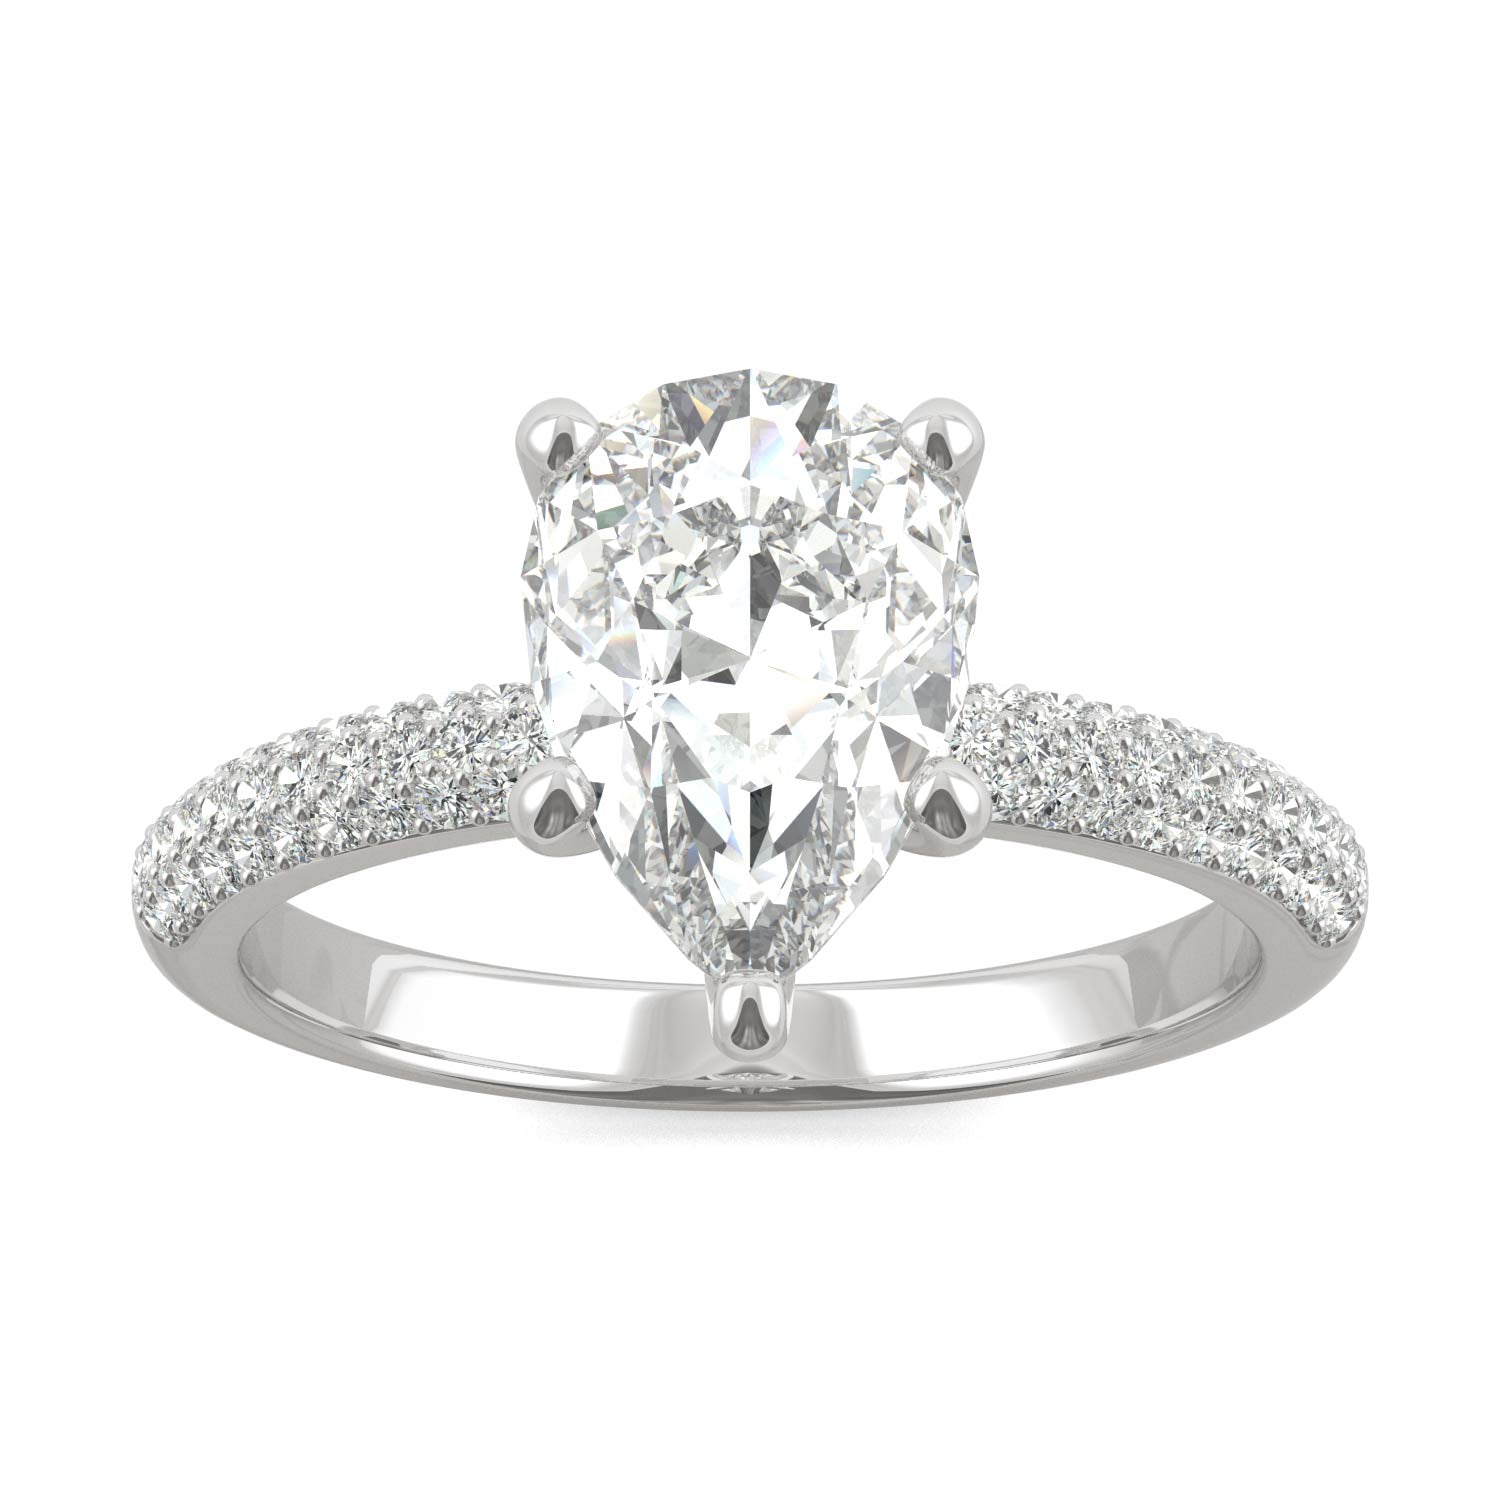 2.31 CTW DEW Pear Moissanite Pave Ring in 14K White Gold